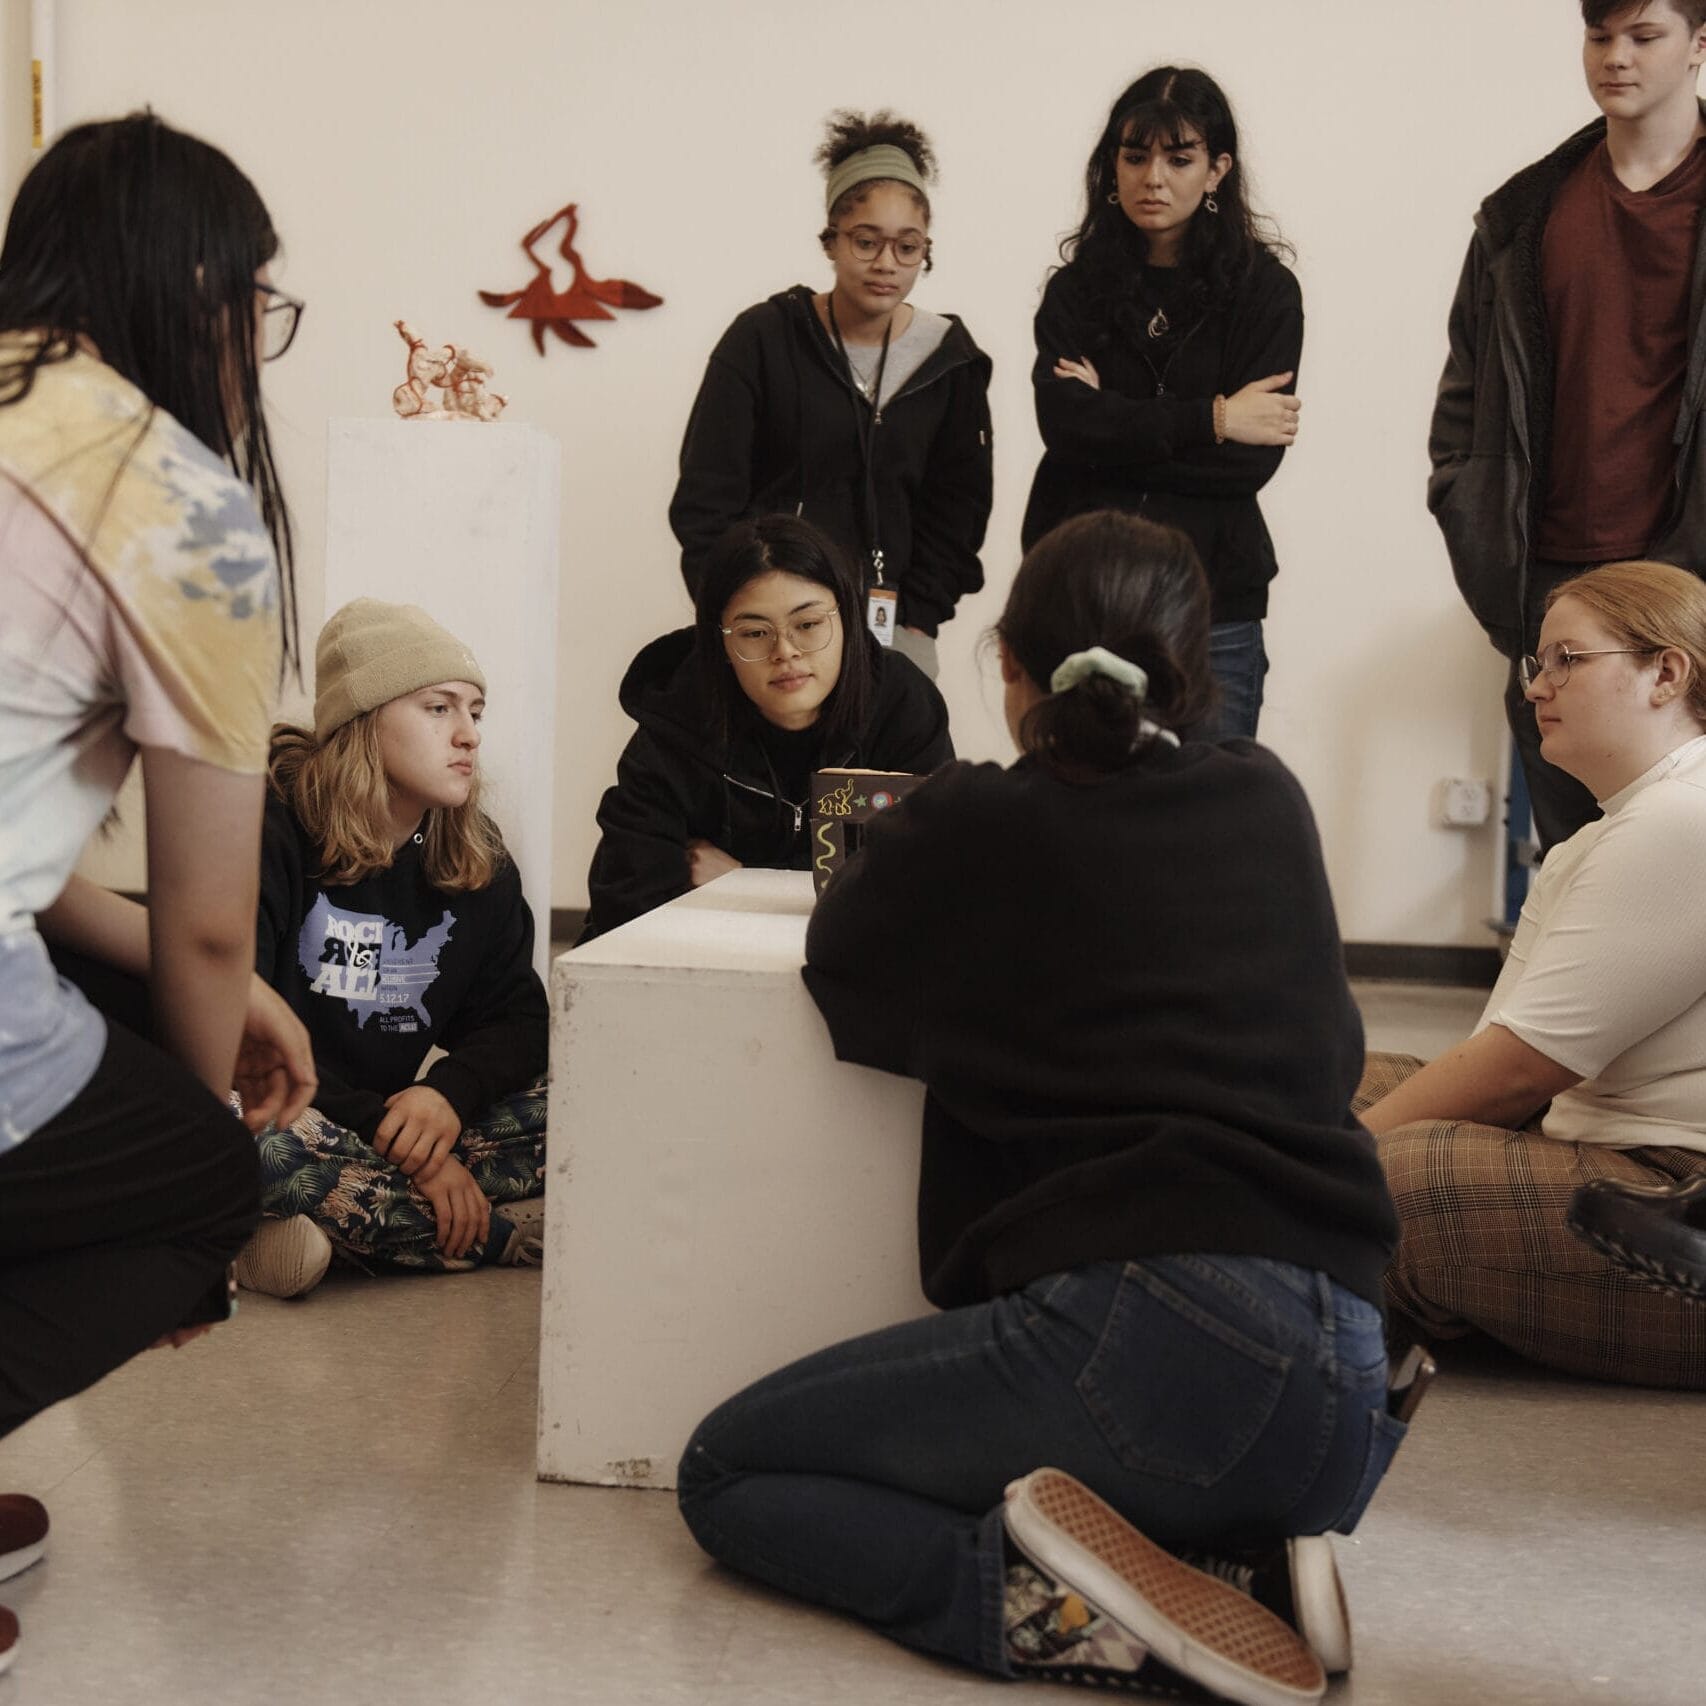 Students lean in to look at a piece of artwork on a pedestal in a gallery space.